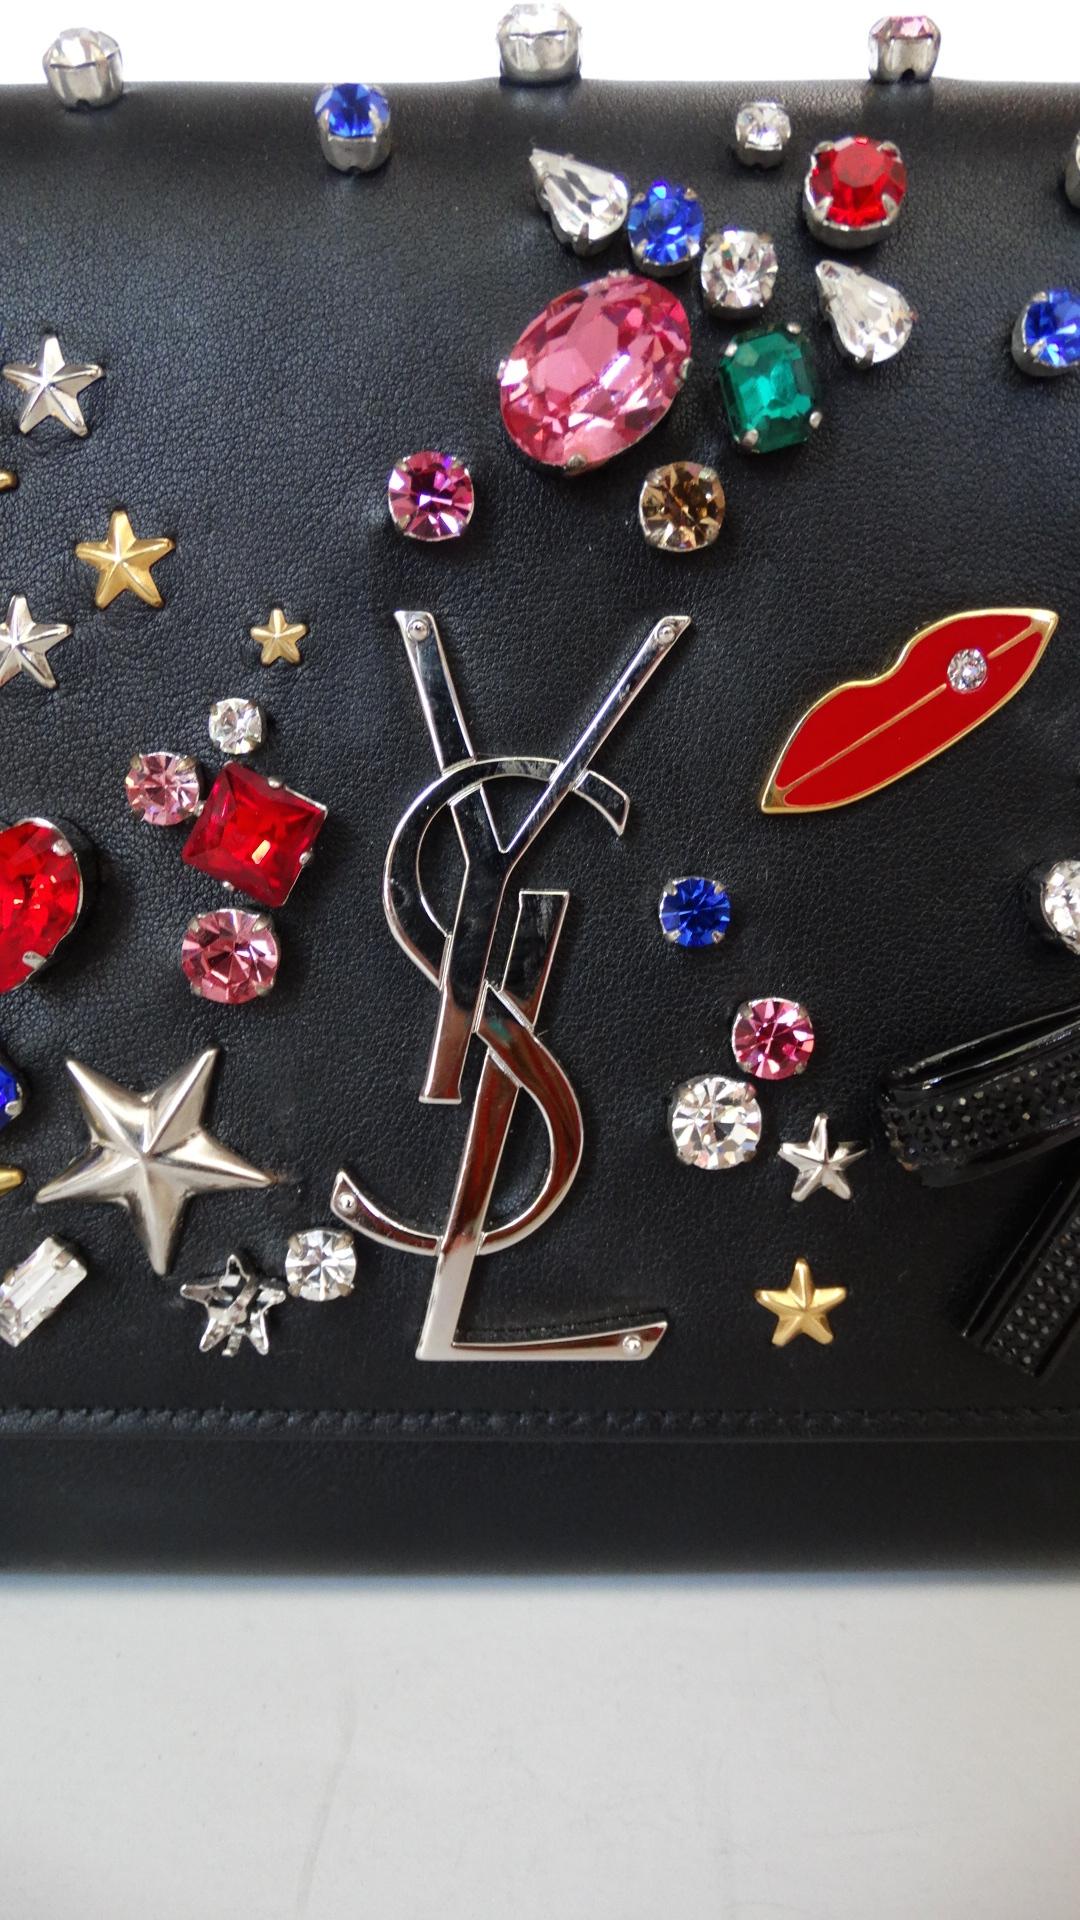 The most magical embellished bag from Saint Laurent's Fall/Winter 2016 collection! Made of a soft black leather and decorated all over with rhinestones, bows, stars, moons, lips and music notes! 